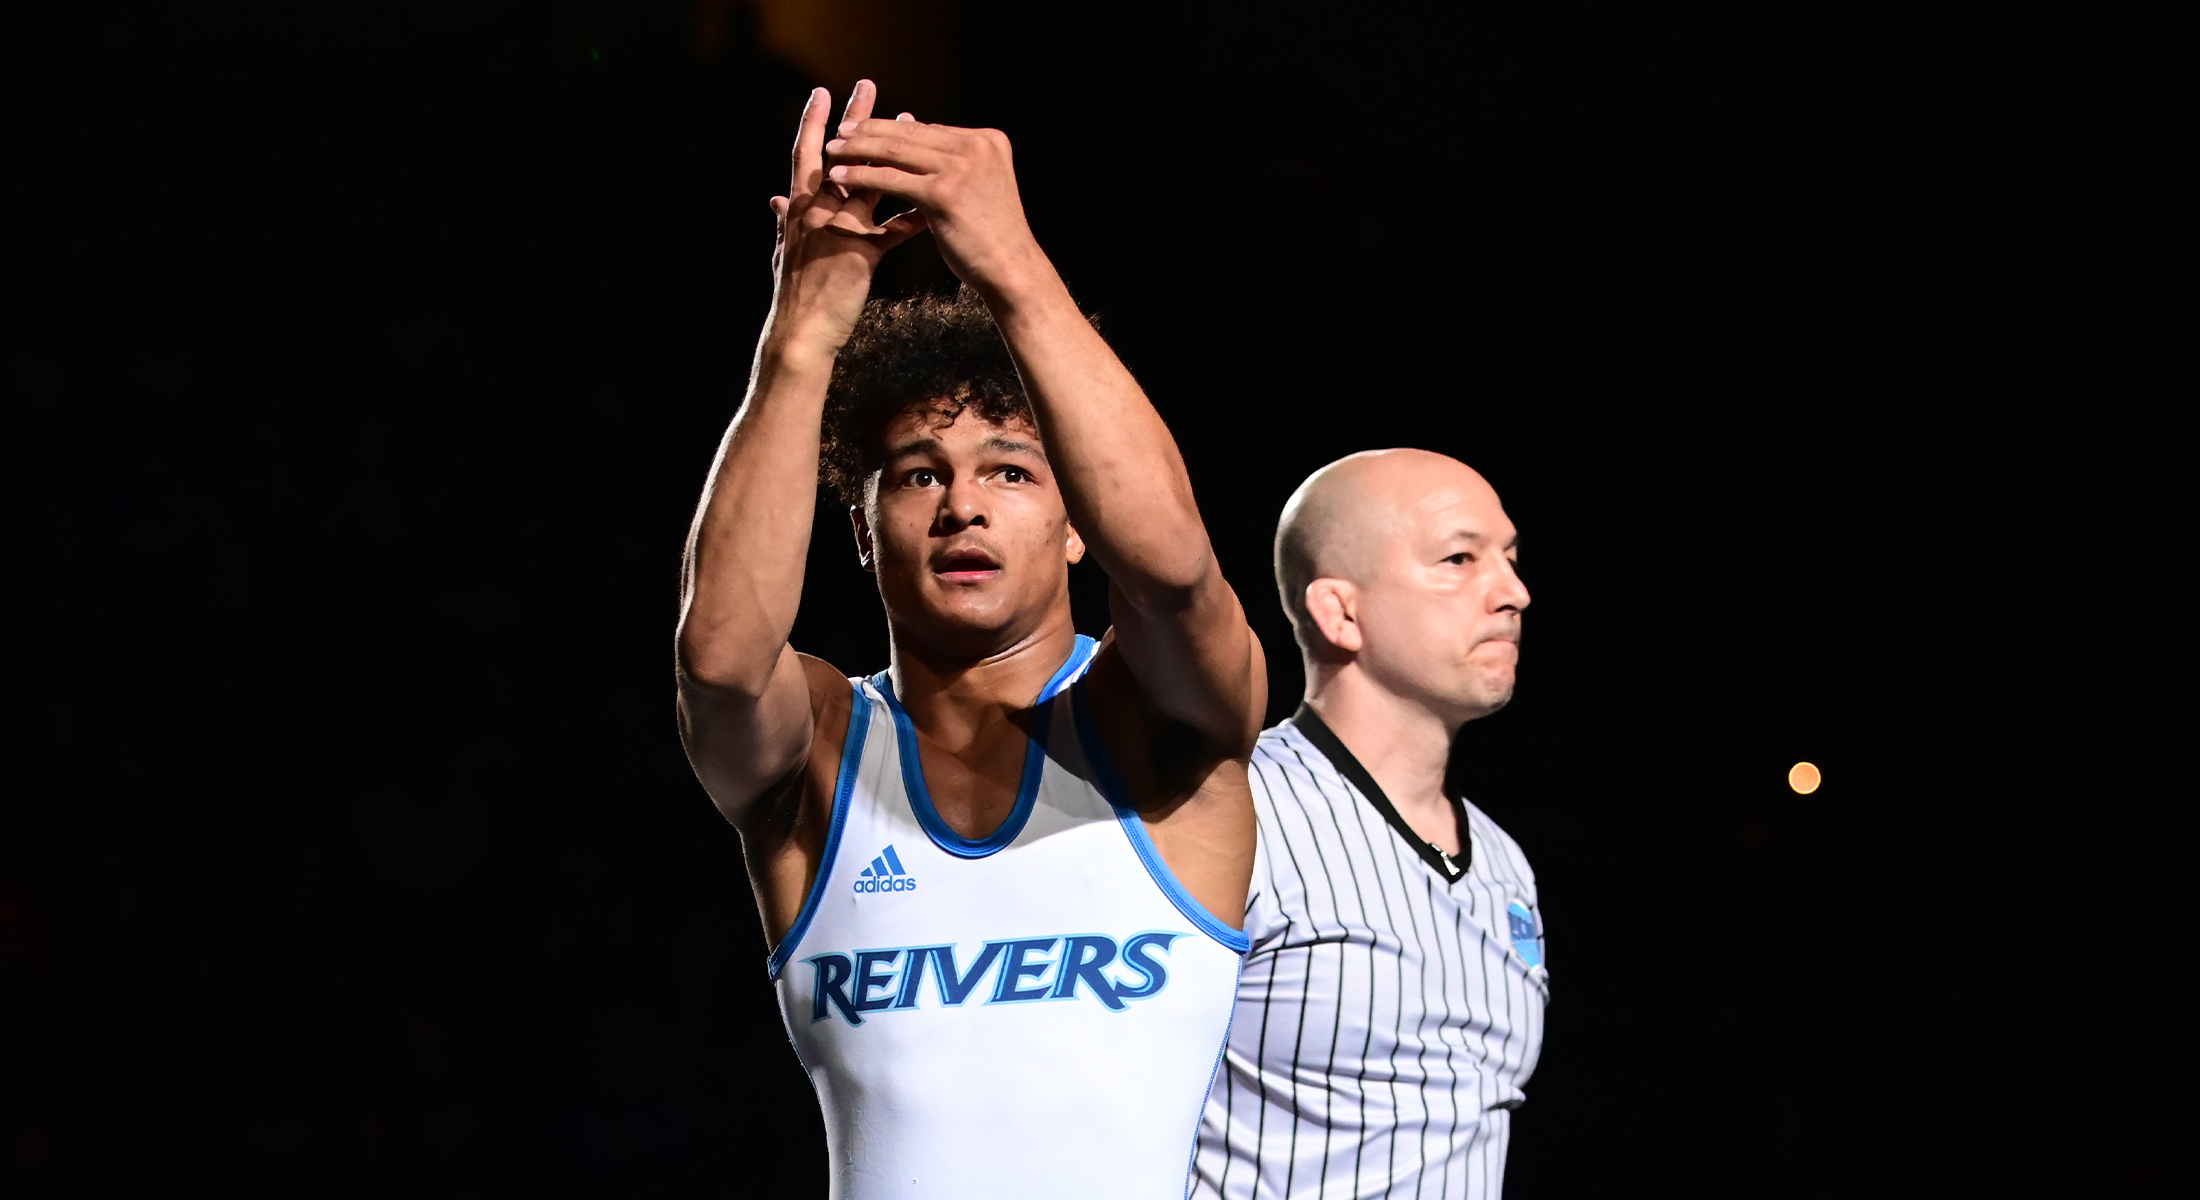 Two Reivers Win National Titles